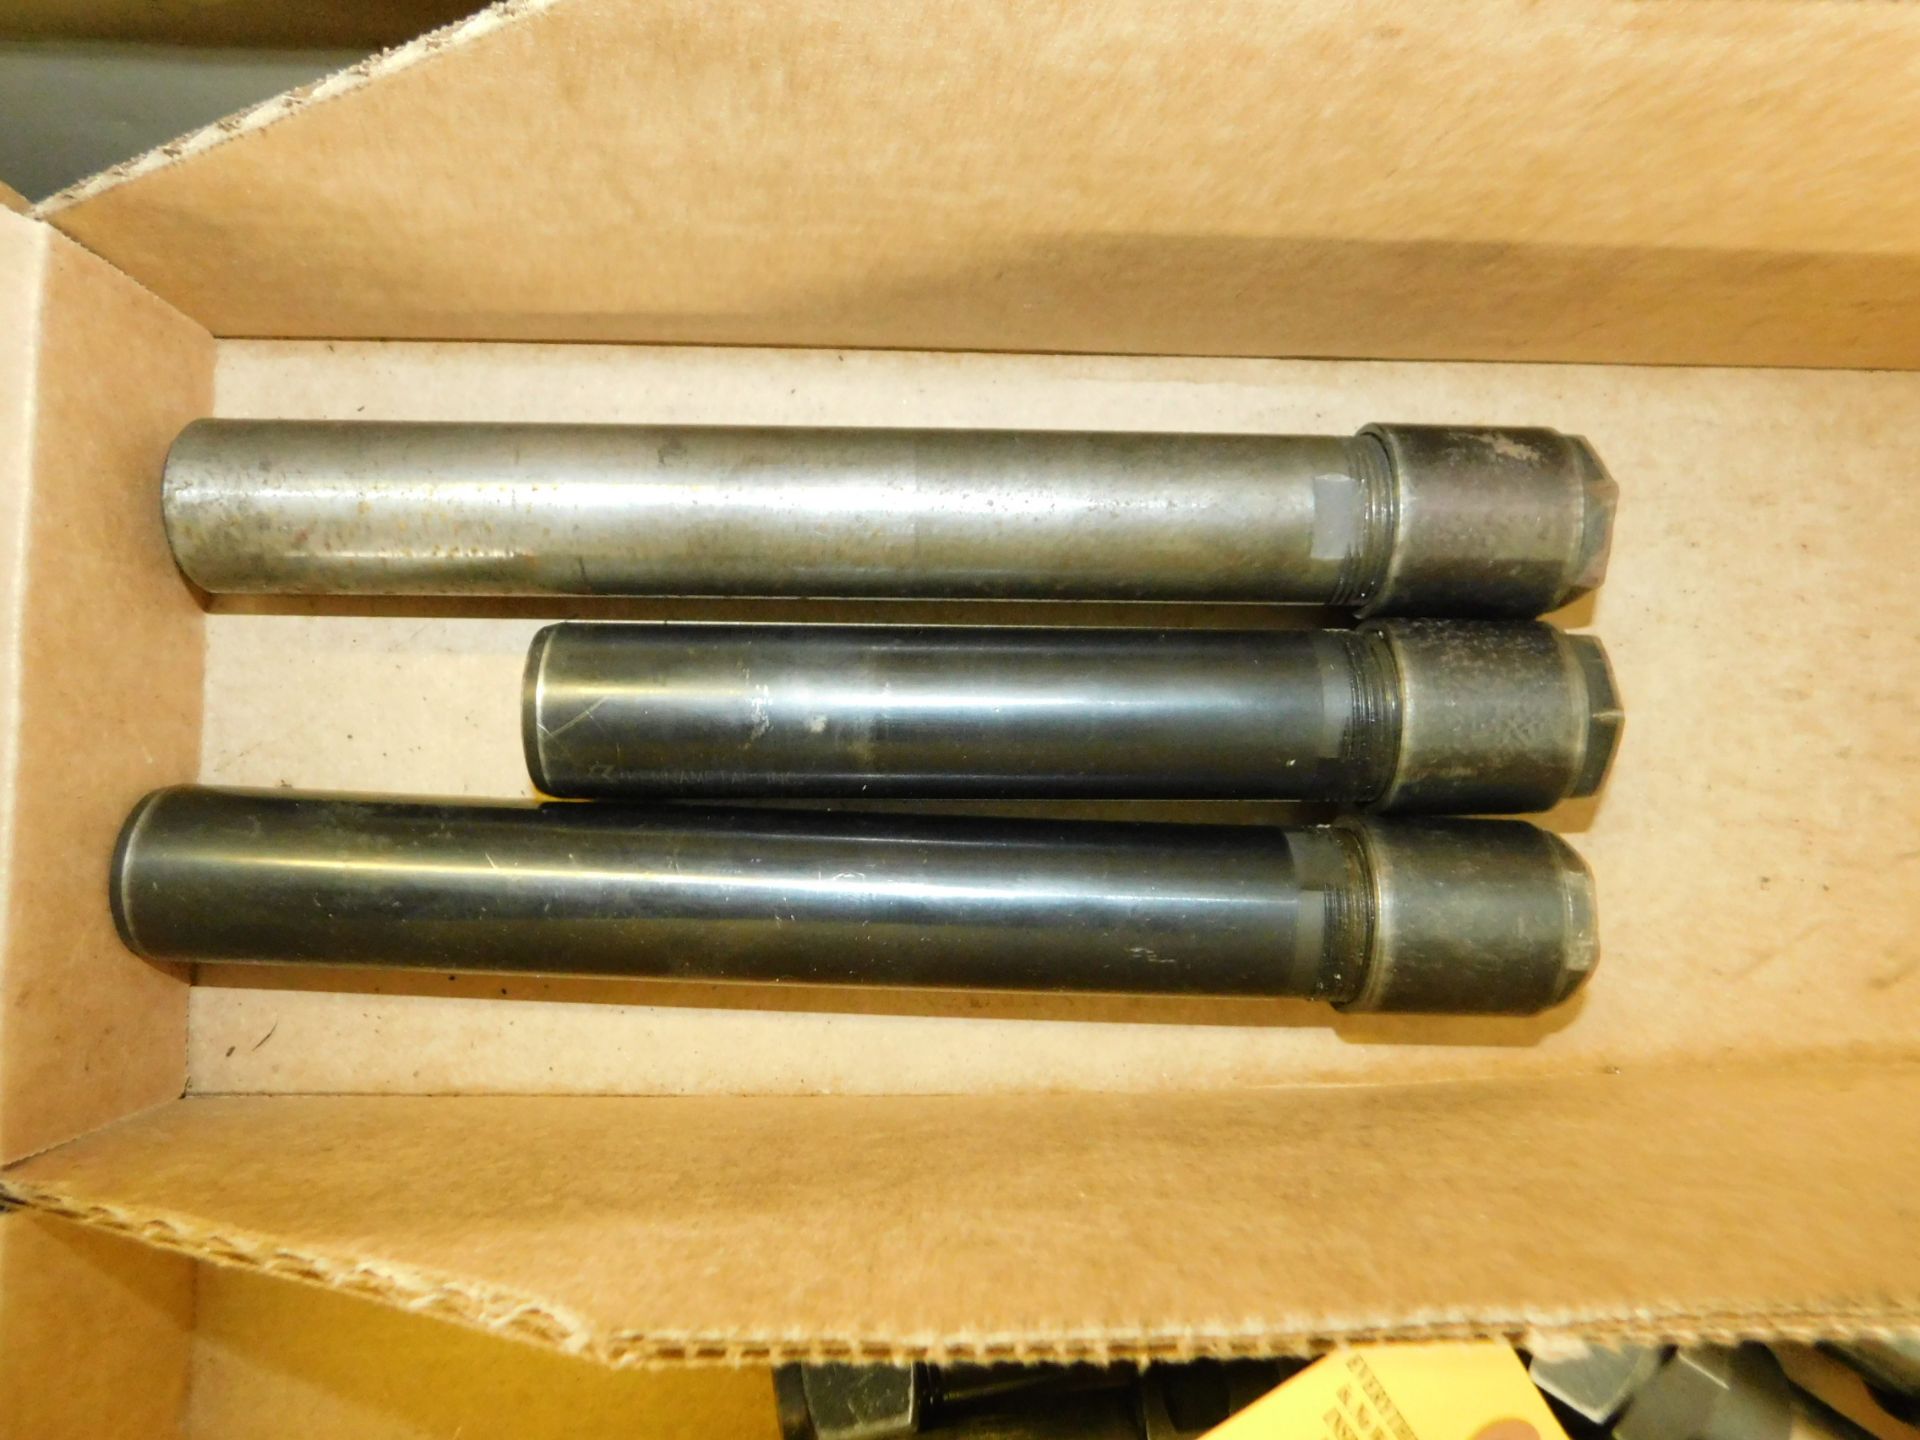 Straight Shank Collet Holders